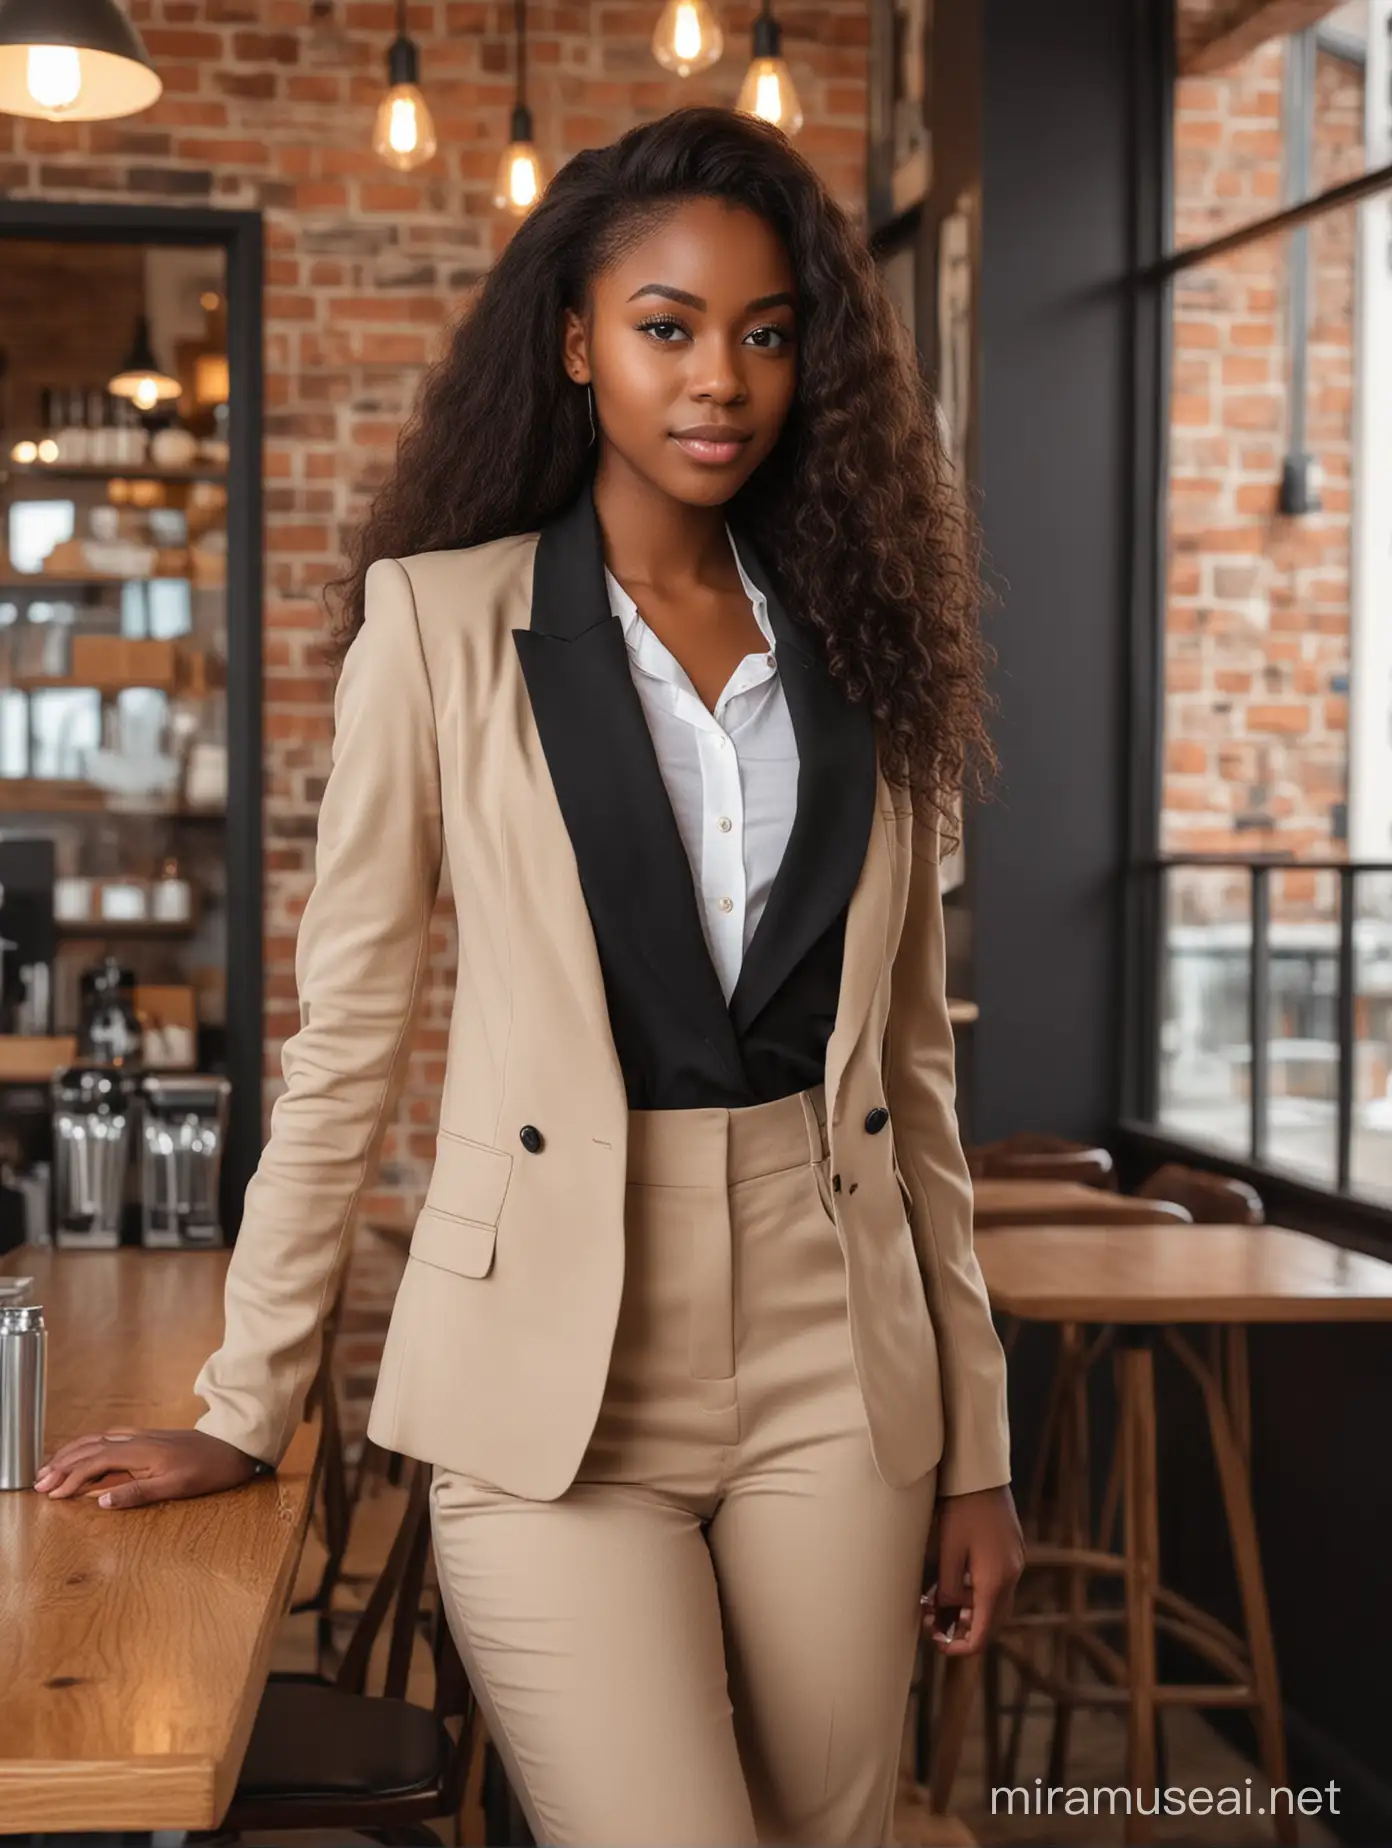 Stylish 24YearOld Black Woman in Coffee Shop with Long Hair and Blazer Suit